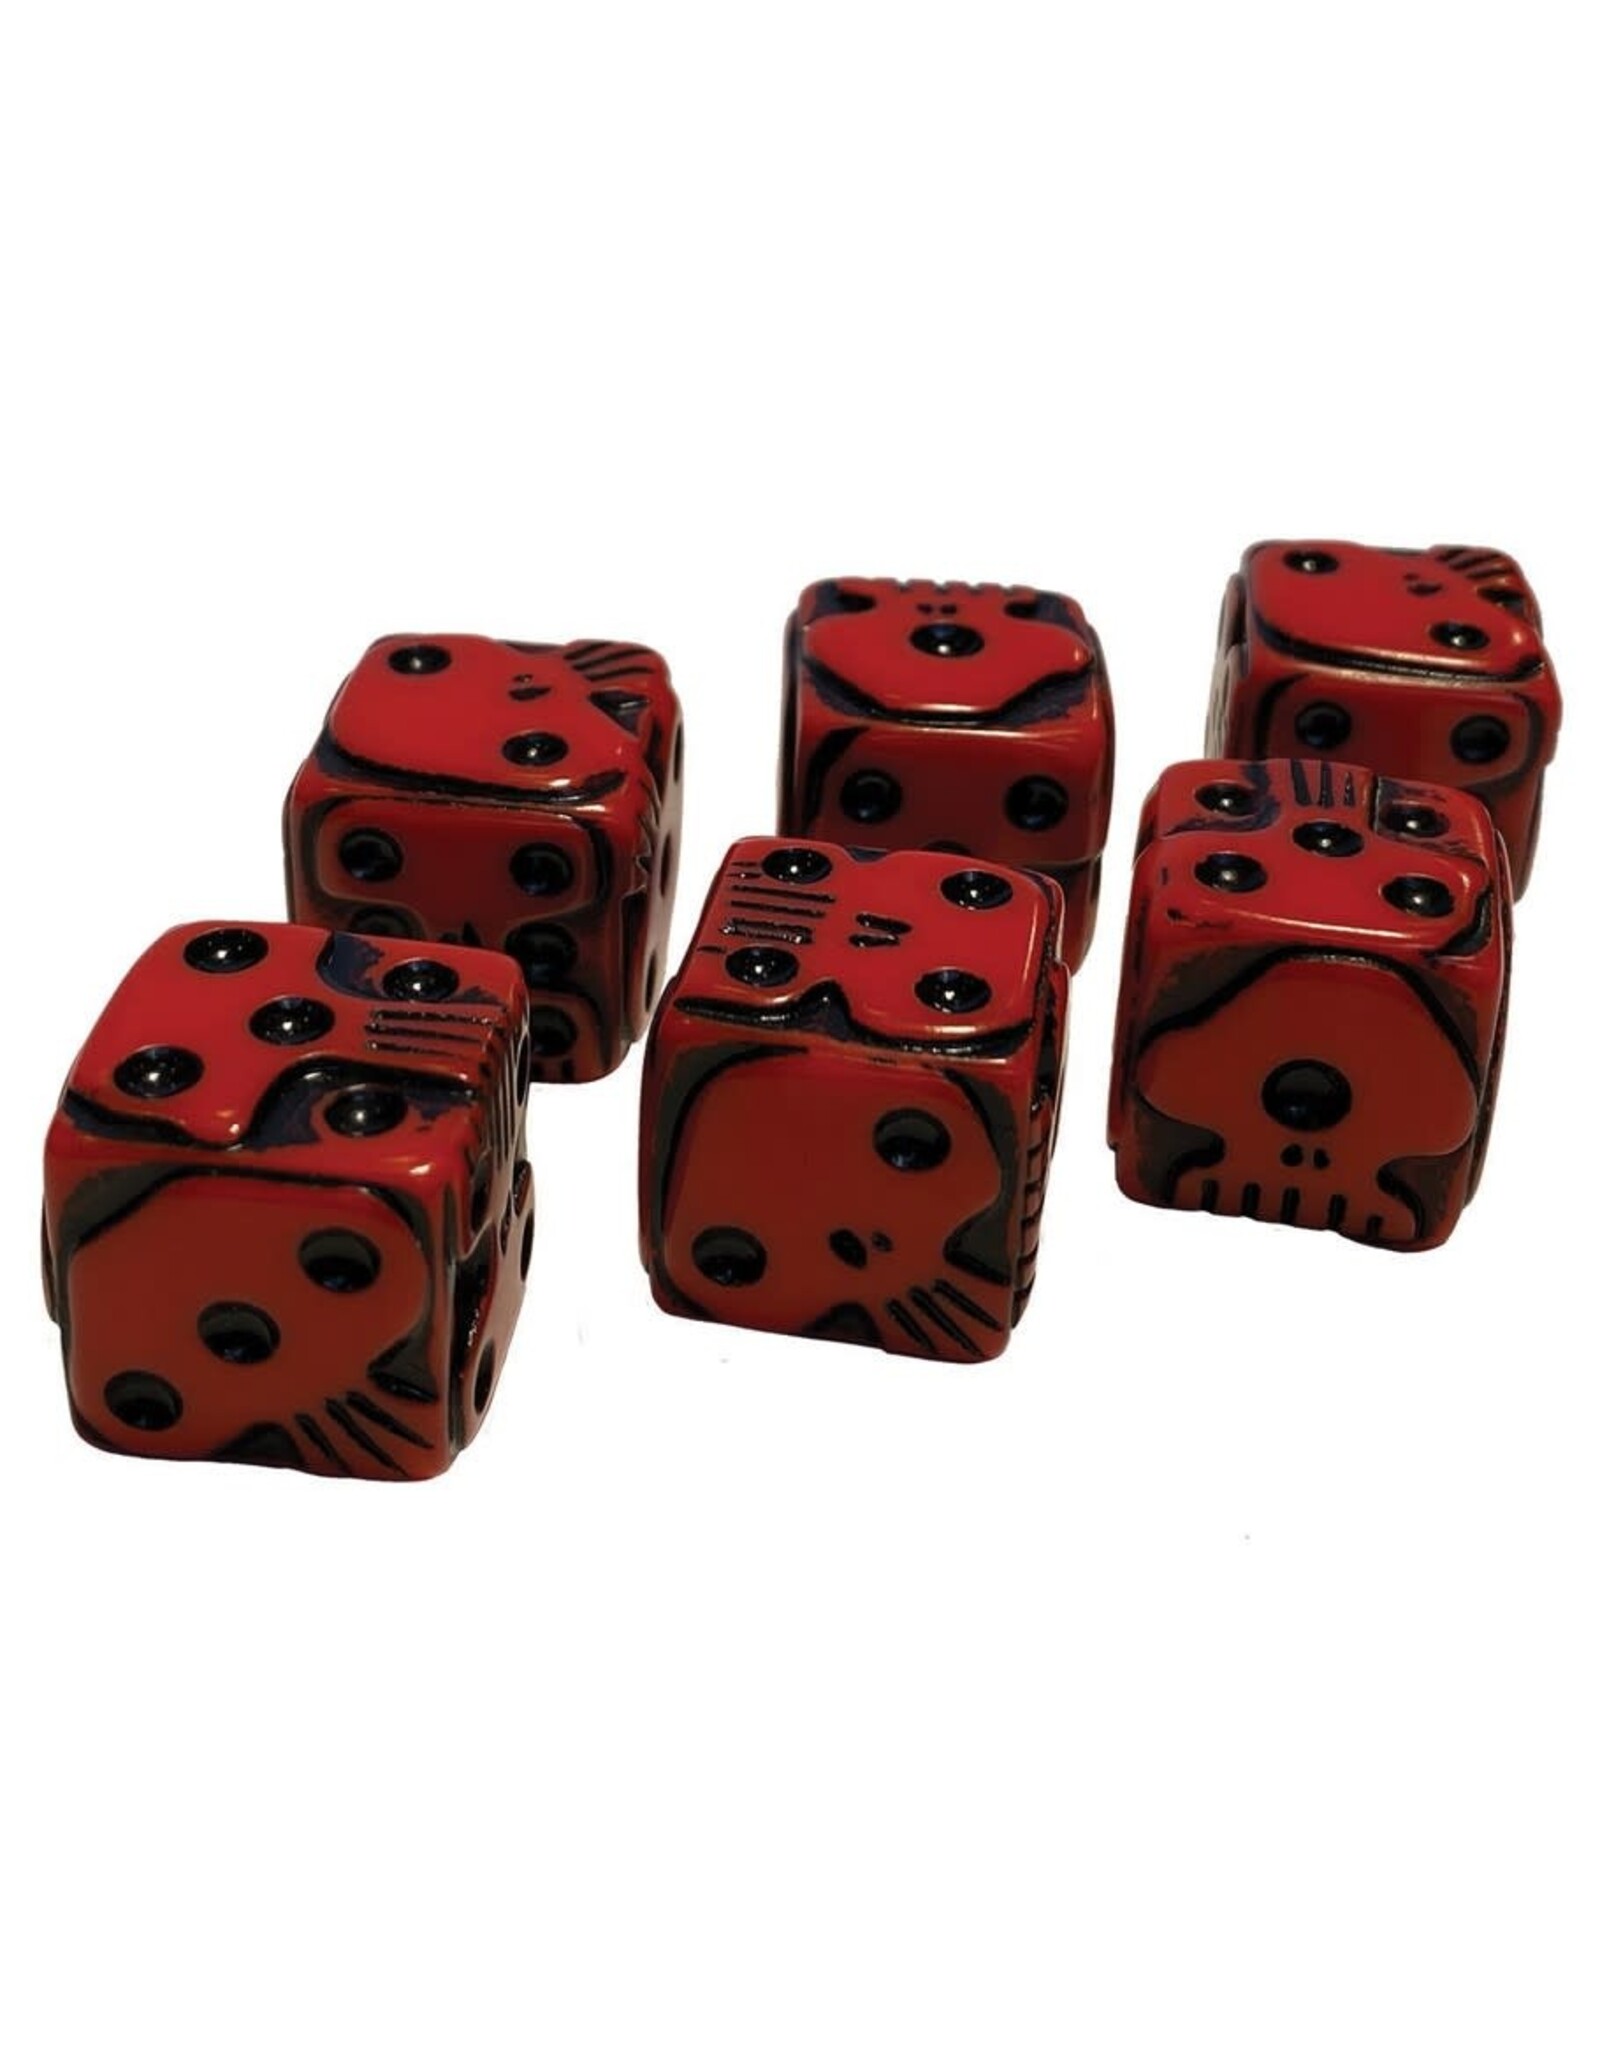 USAopoly Premium Nightmare Before Christmas D6 Dice Set